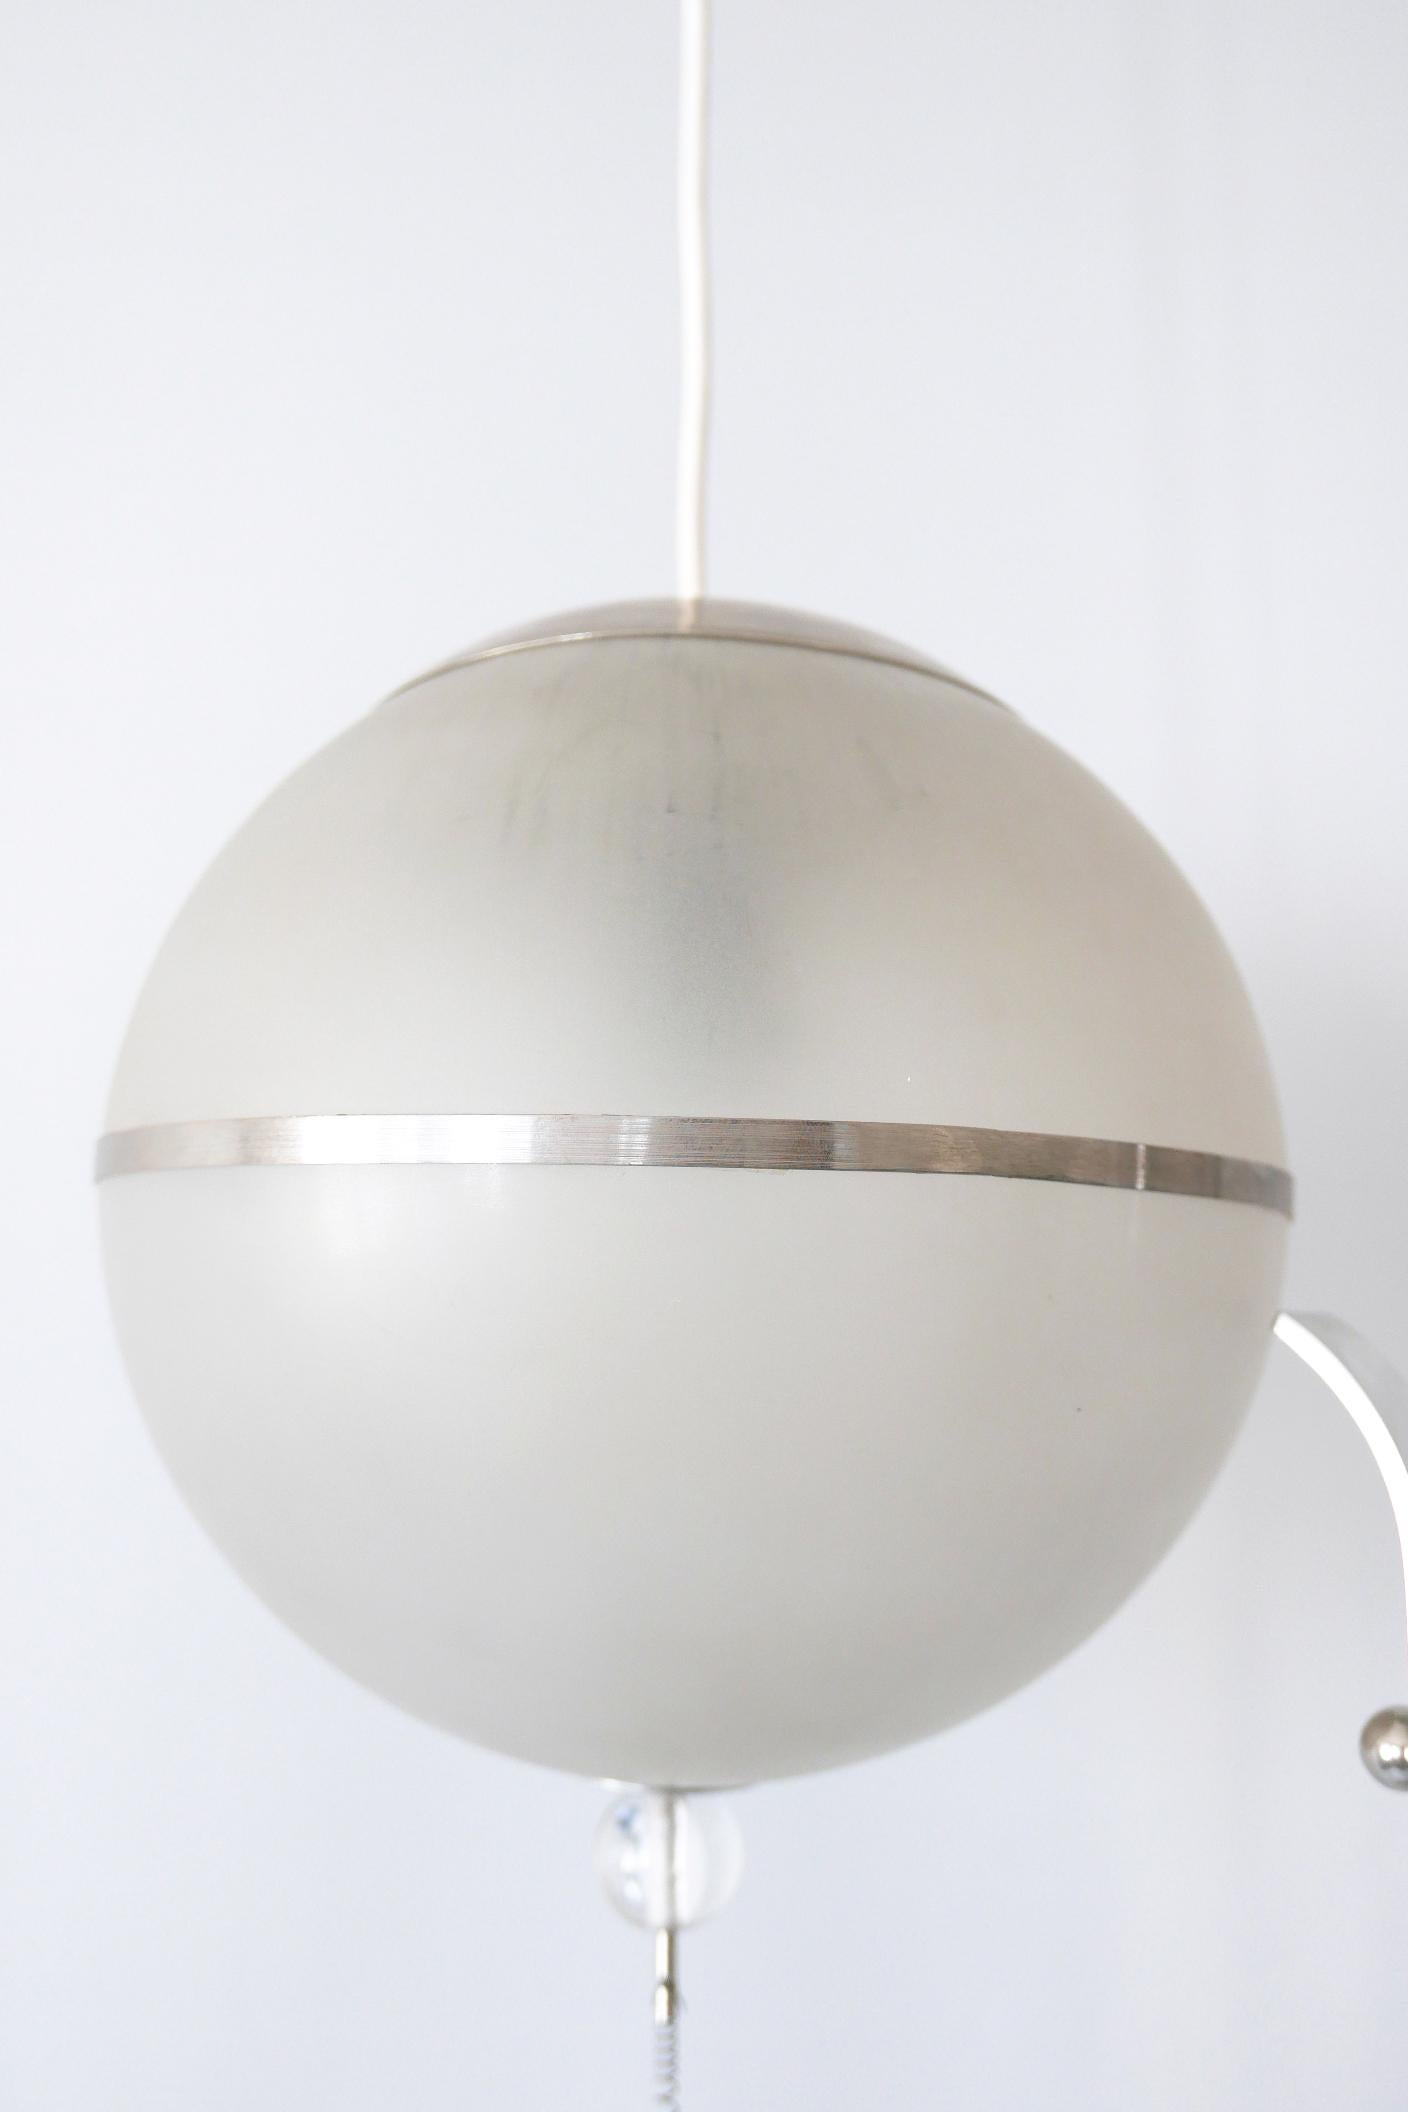 Bauhaus Floor Lamp by Karl Trabert for Schanzenbach & Co 1930s Germany For Sale 9